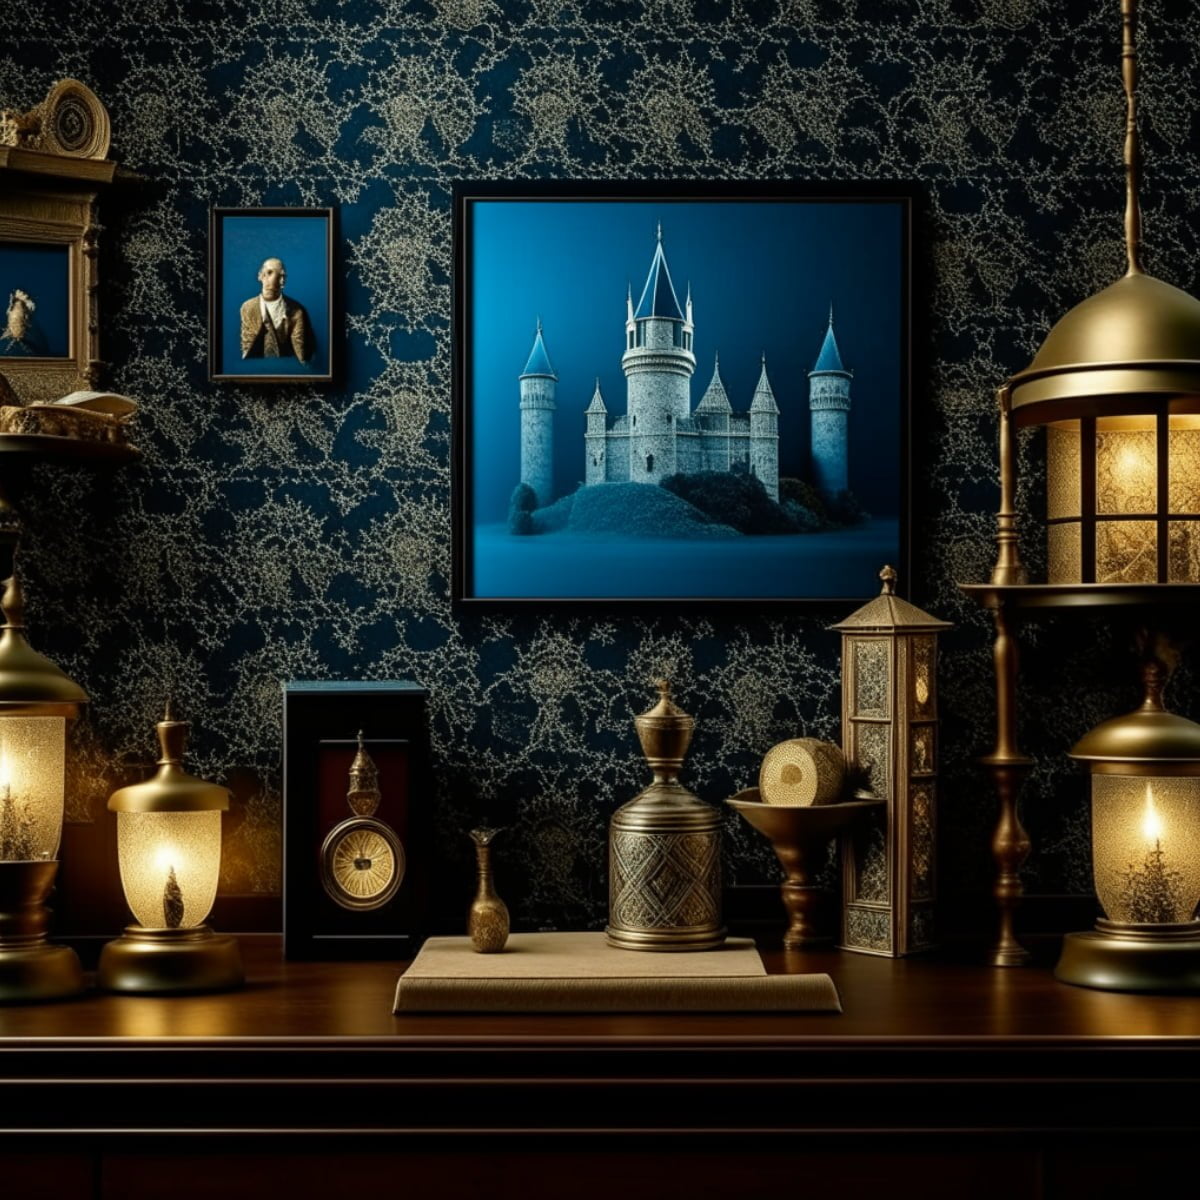 Wizarding World wallpaper. Opt for patterns featuring iconic symbols, house crests